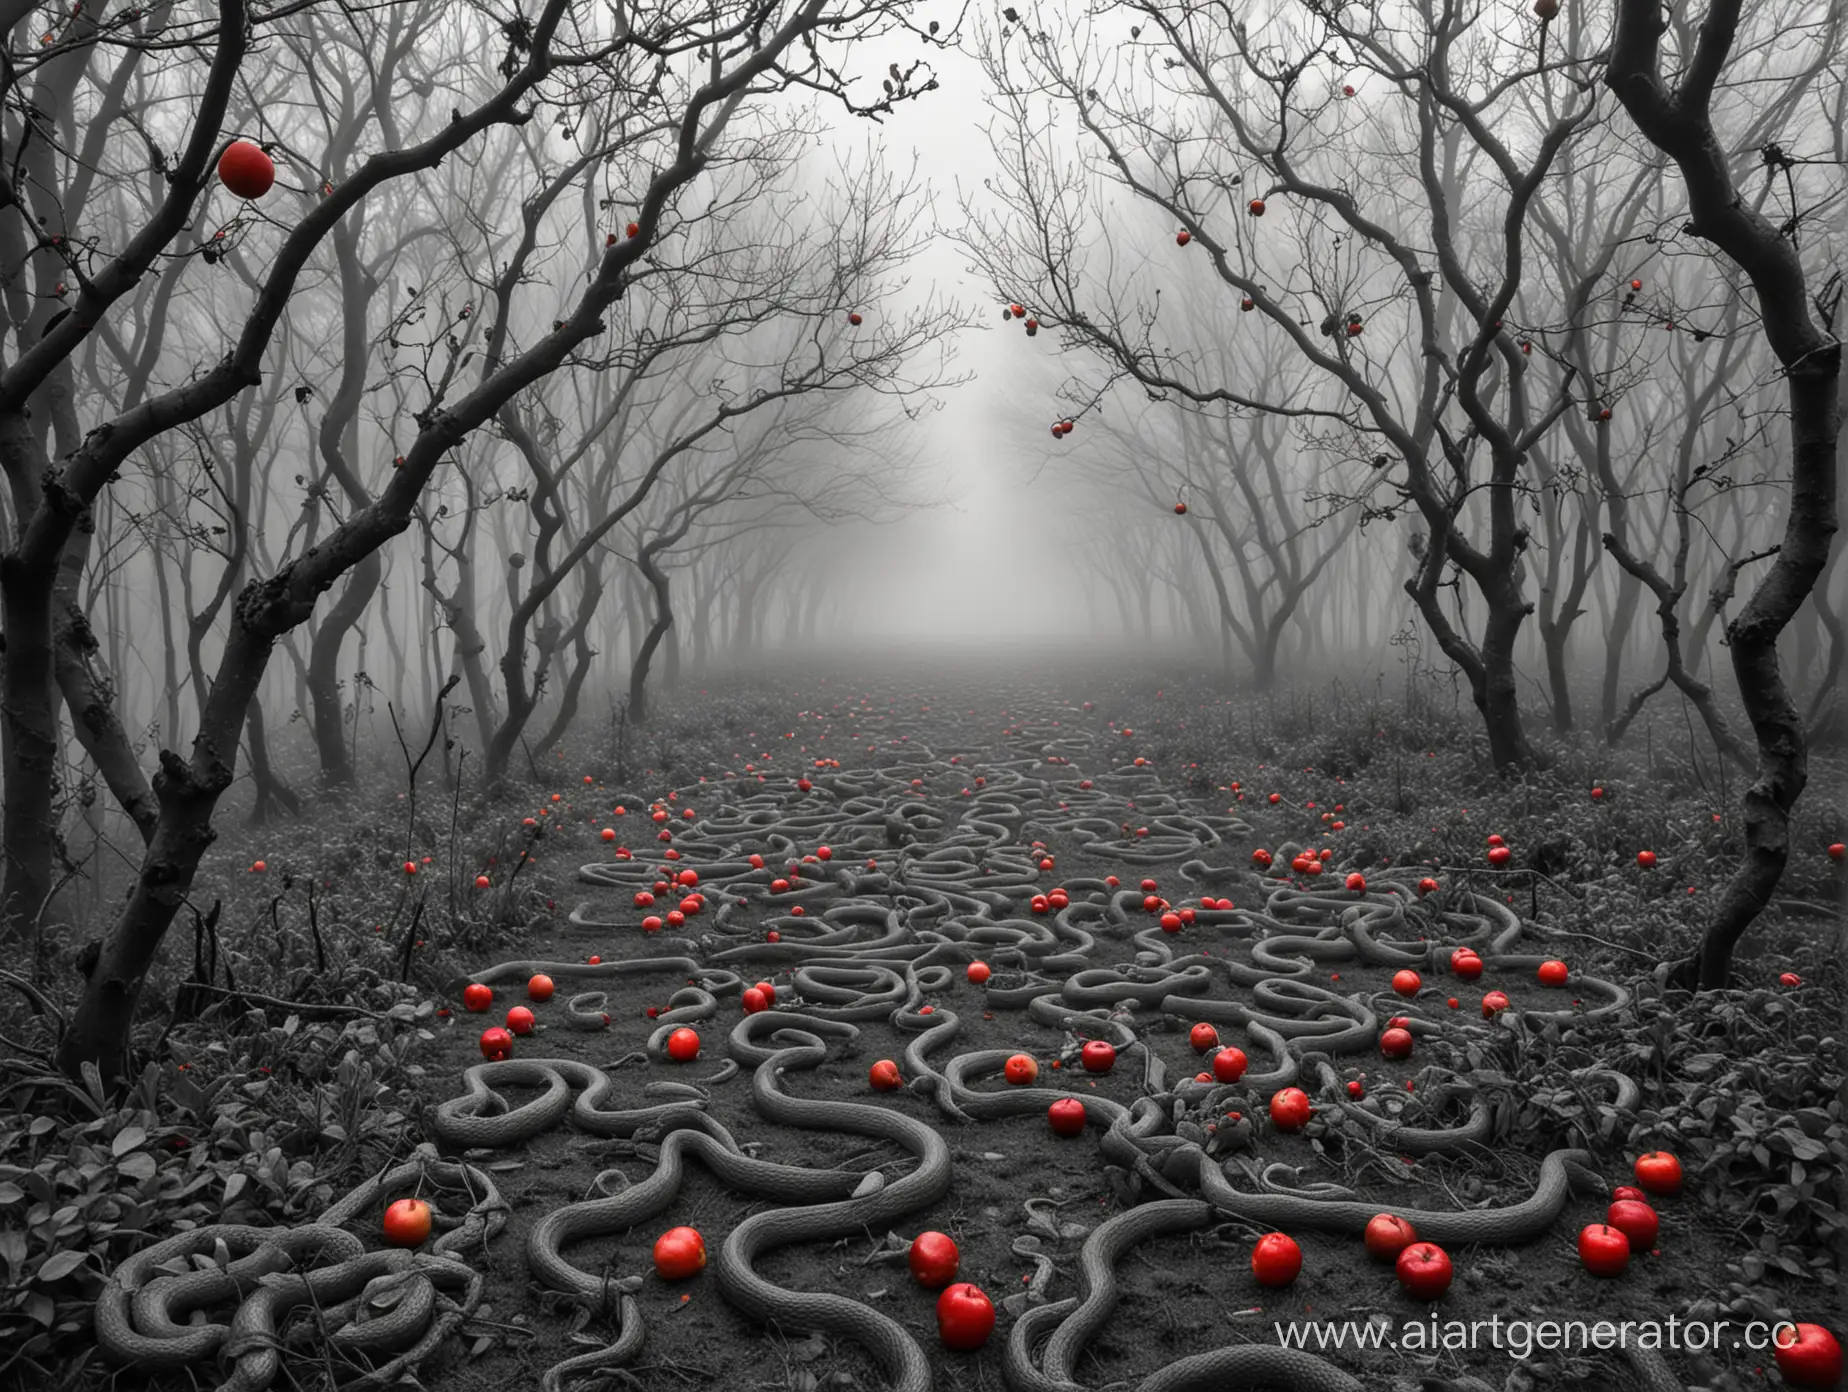 Monochrome-Garden-Enigmatic-Mist-with-Red-Apples-and-Sinister-Serpents